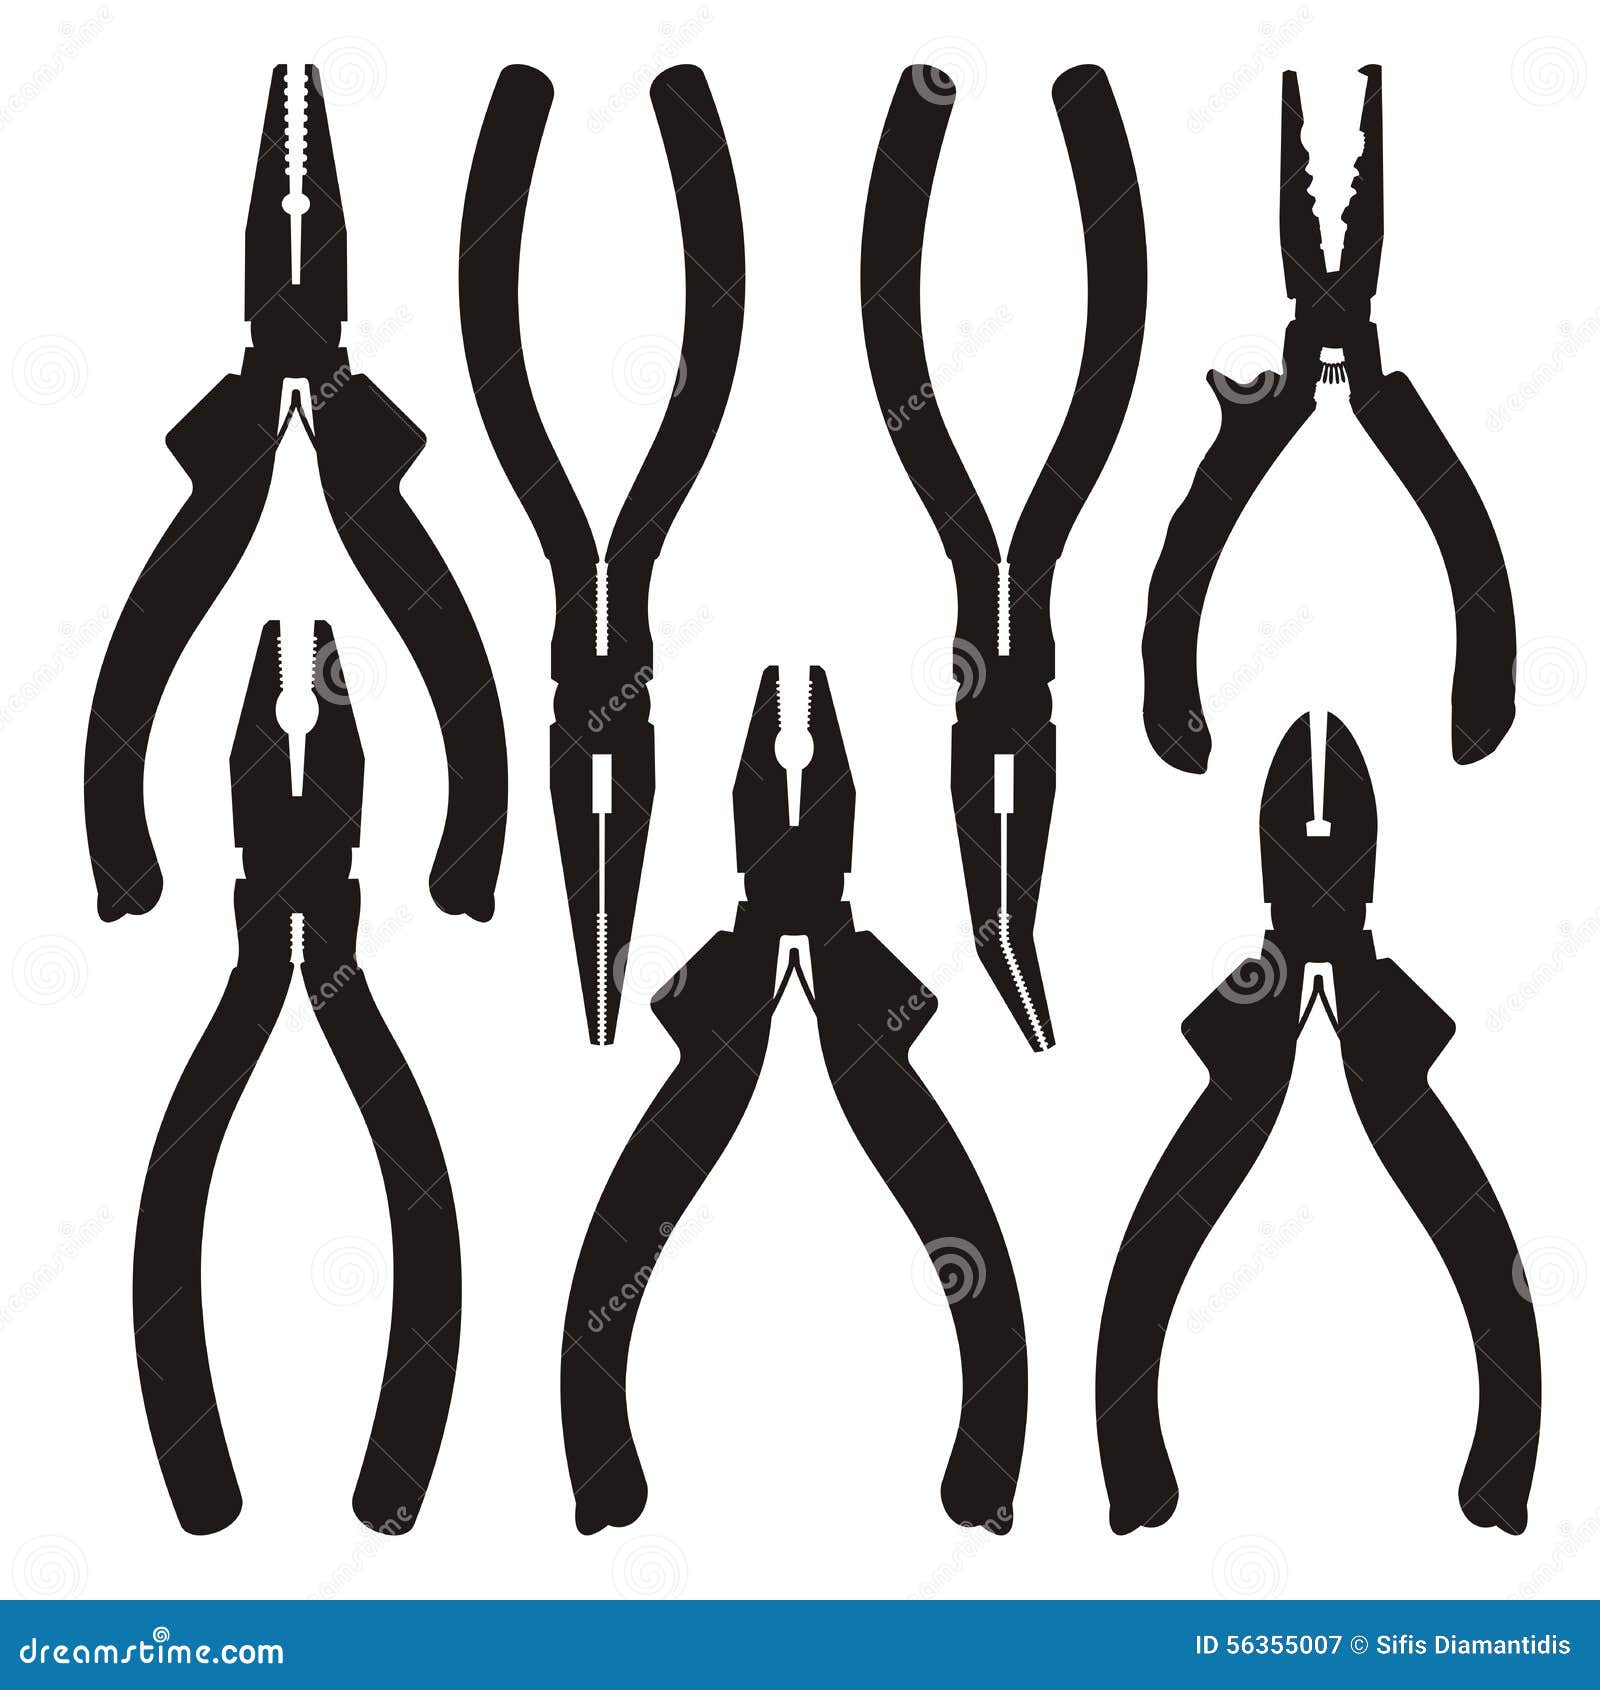 pliers icons